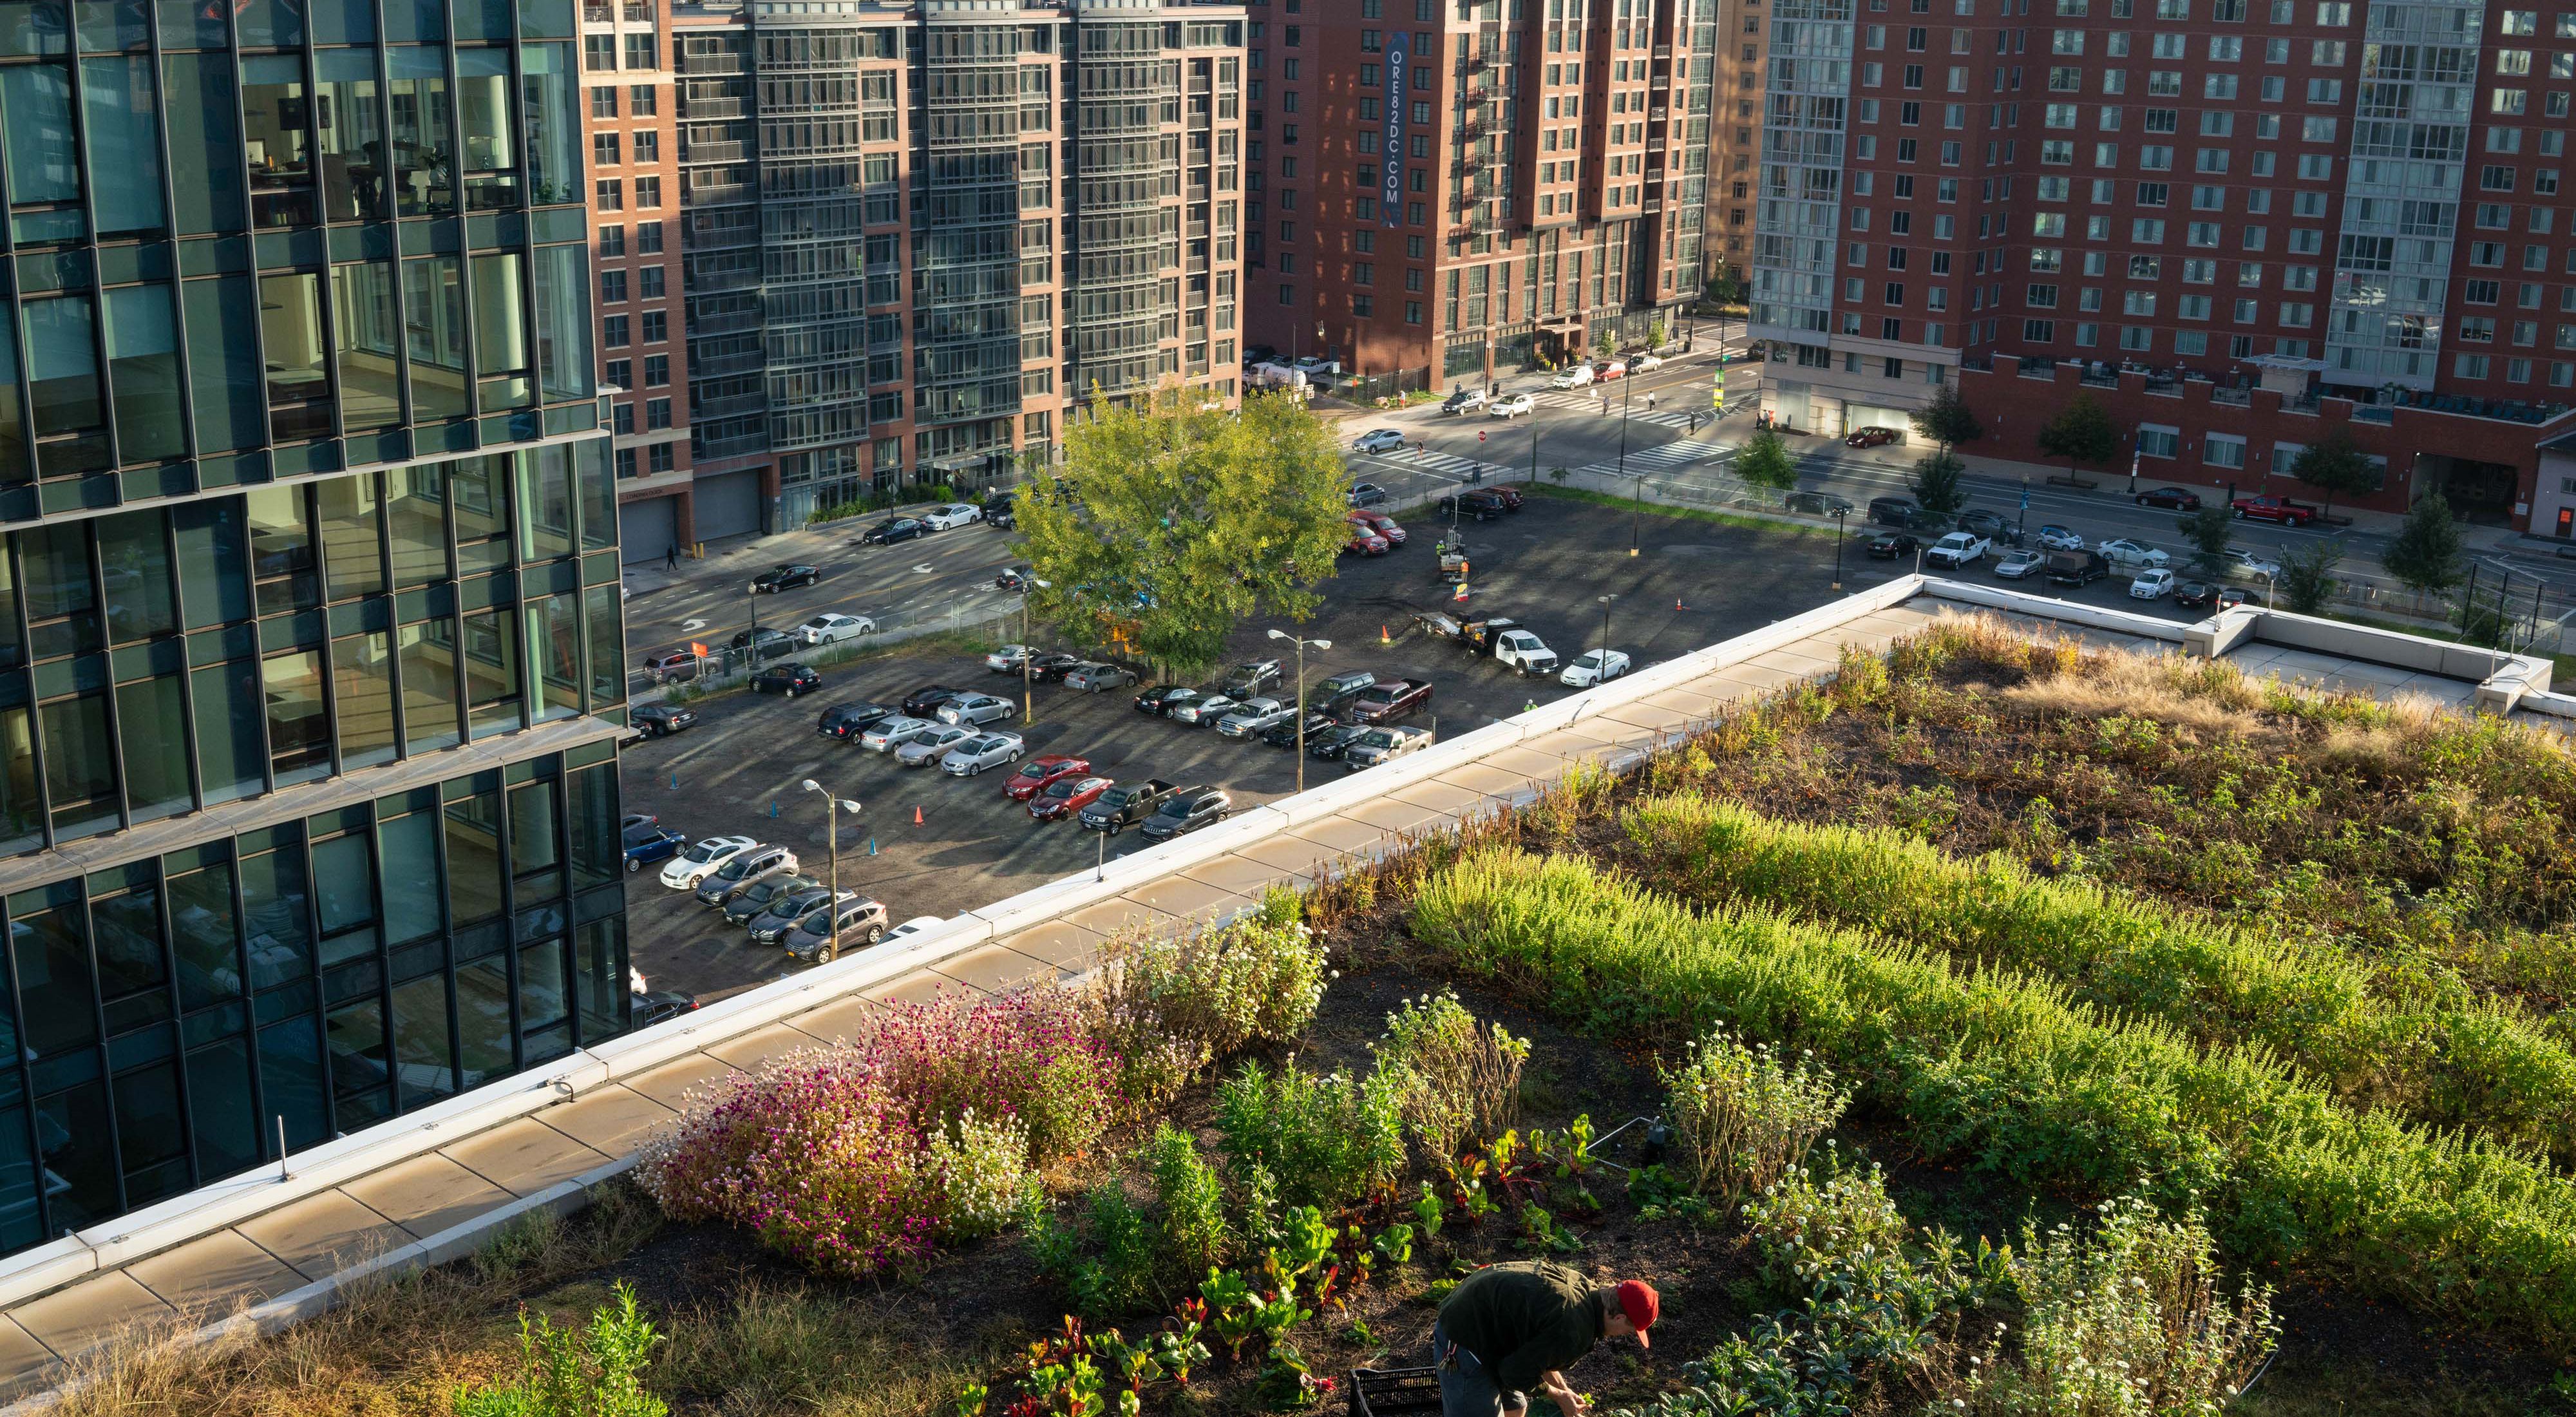 Rooftop garden pictured in the middle of a city.